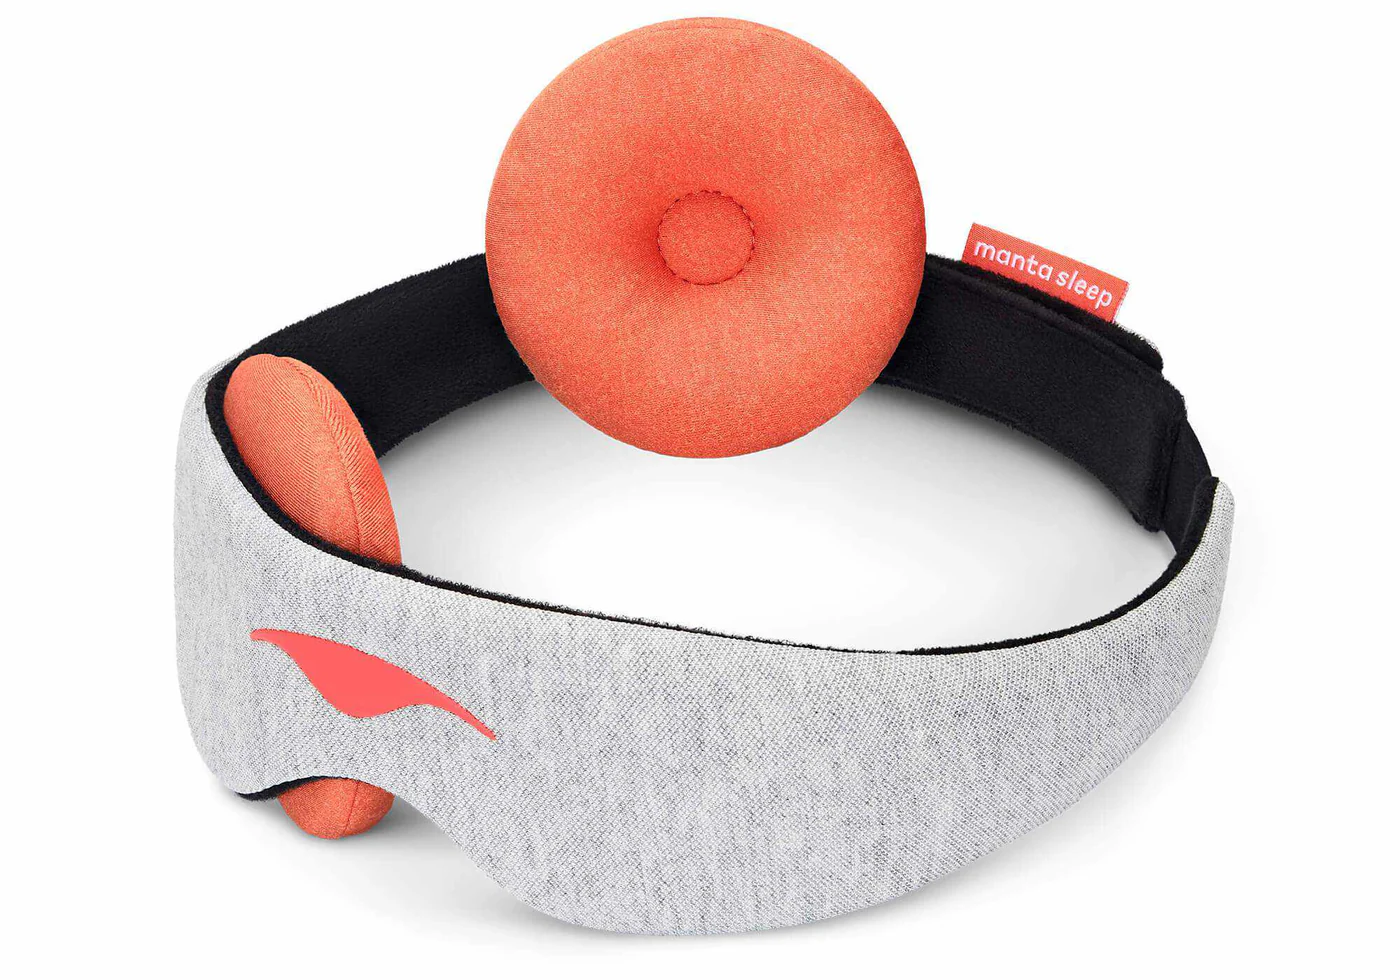 A light gray sleep mask with an orange warming eye cup attached to the front and another eye cup on the black strap.